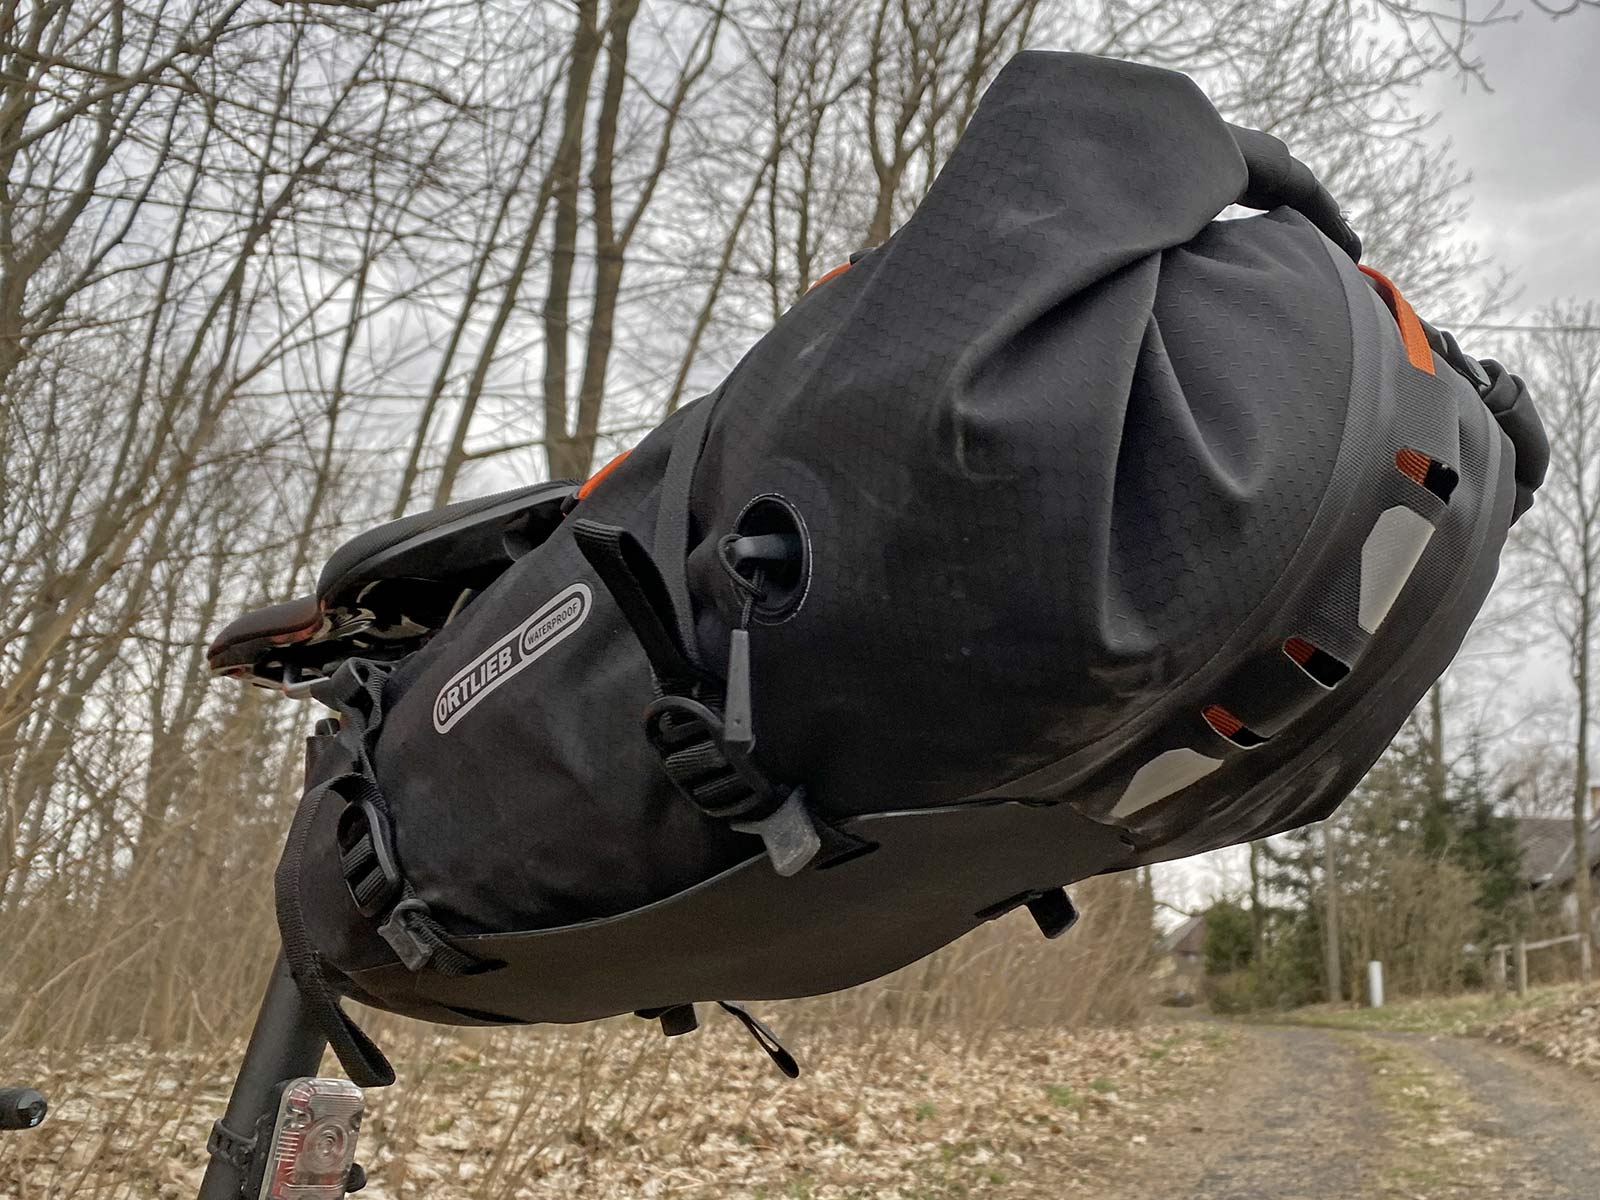 Ortlieb Seat-Pack QR, off-road secure quick-release bikepacking saddlebag Review, rear with tire protection